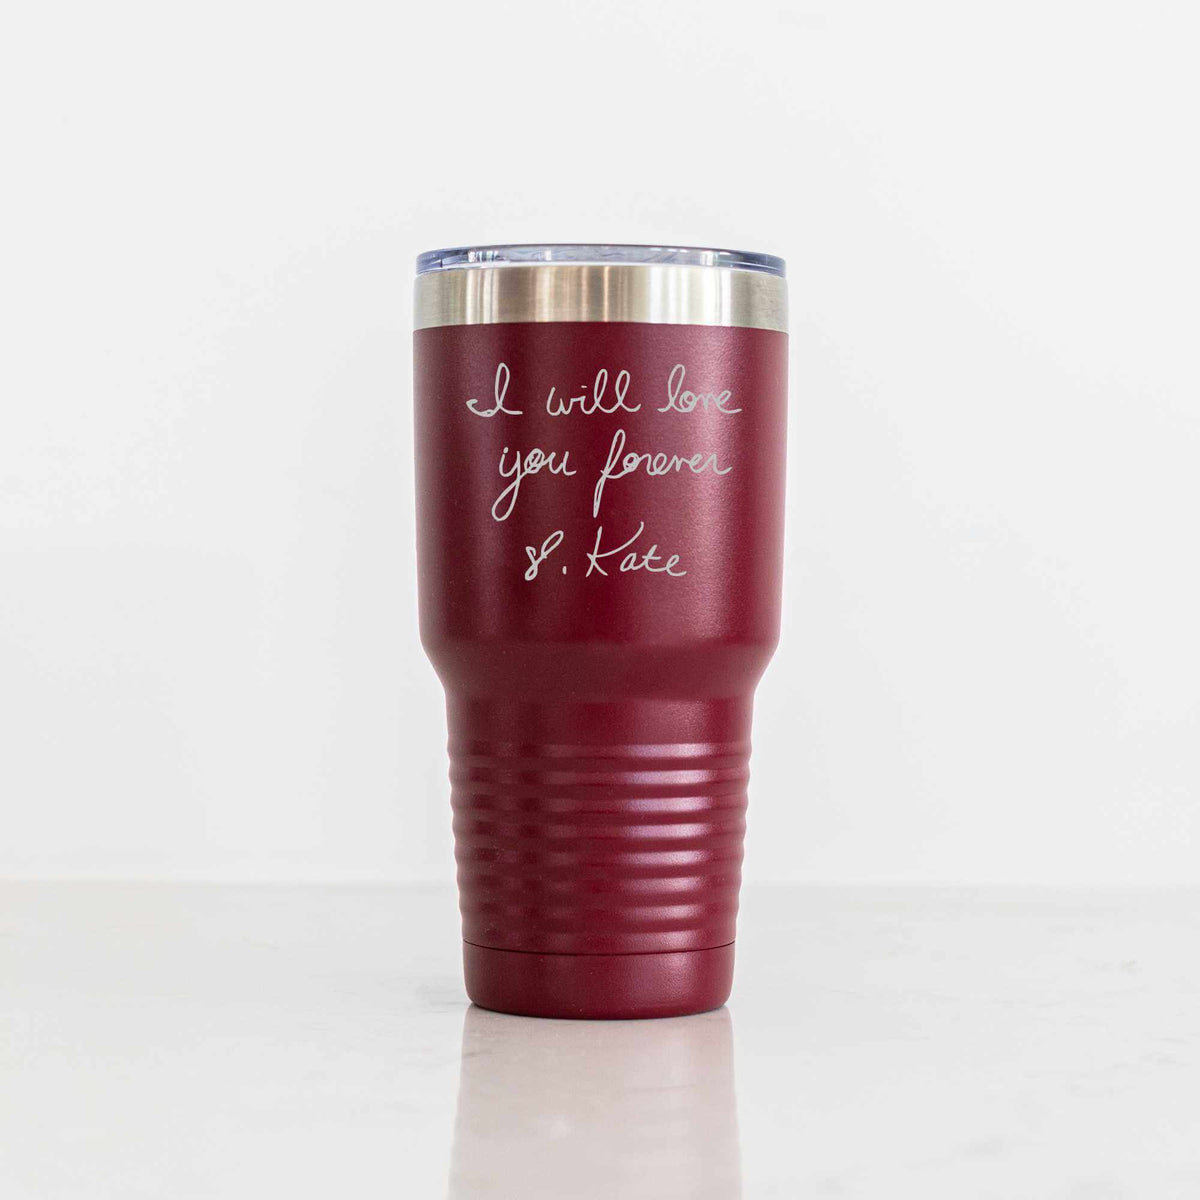  YETI - Personalized TEACHER Appreciation Gift, Laser Engraved  Tumblers and Bottles, Multiple Sizes and Colors Available : Handmade  Products